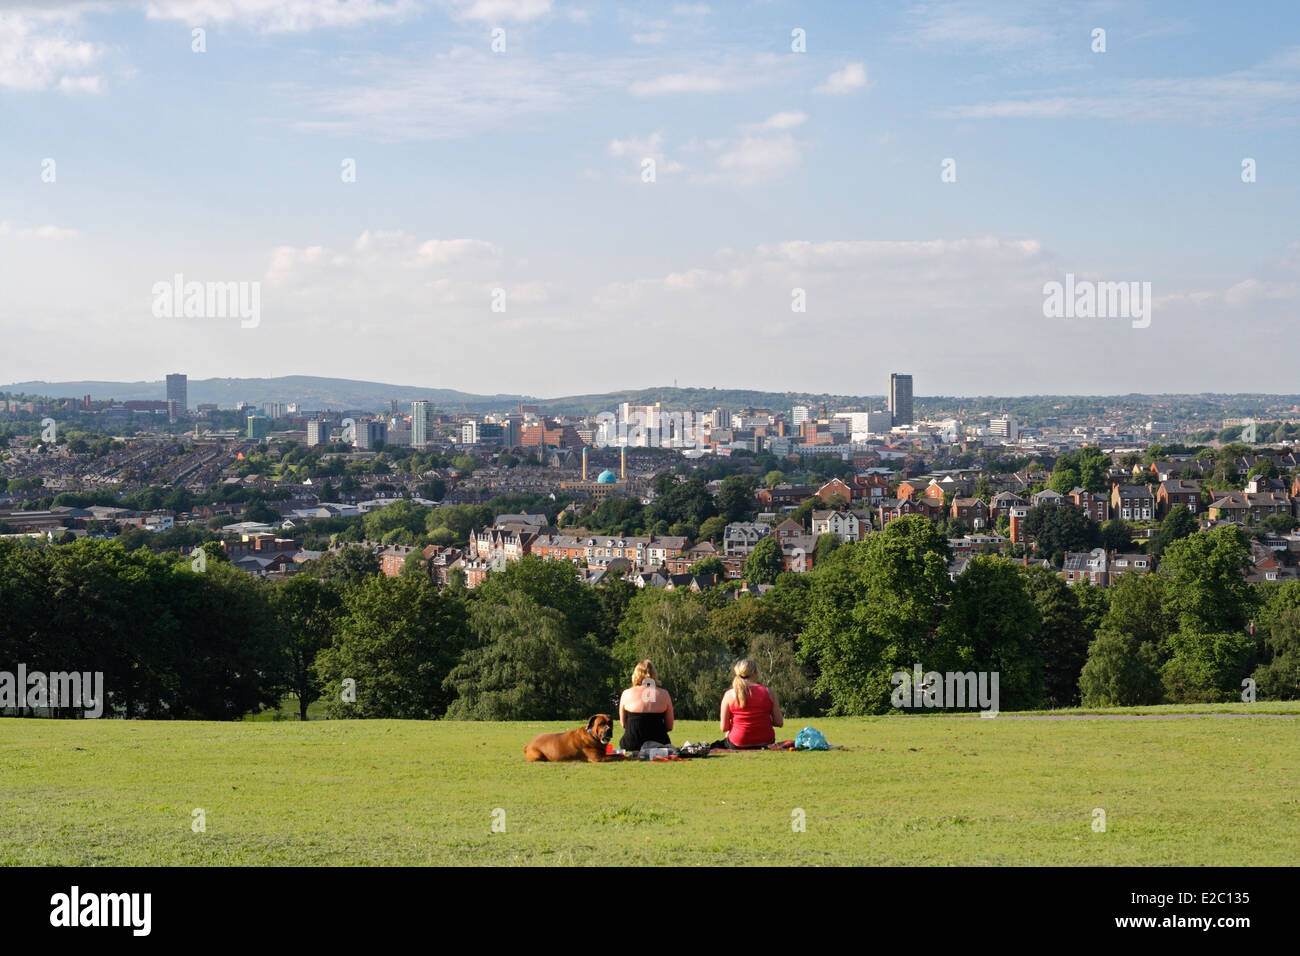 Two women enjoying the scenic view of Sheffield city skyline from Meersbrook Park, England UK. Urban landscape Greenest city Stock Photo